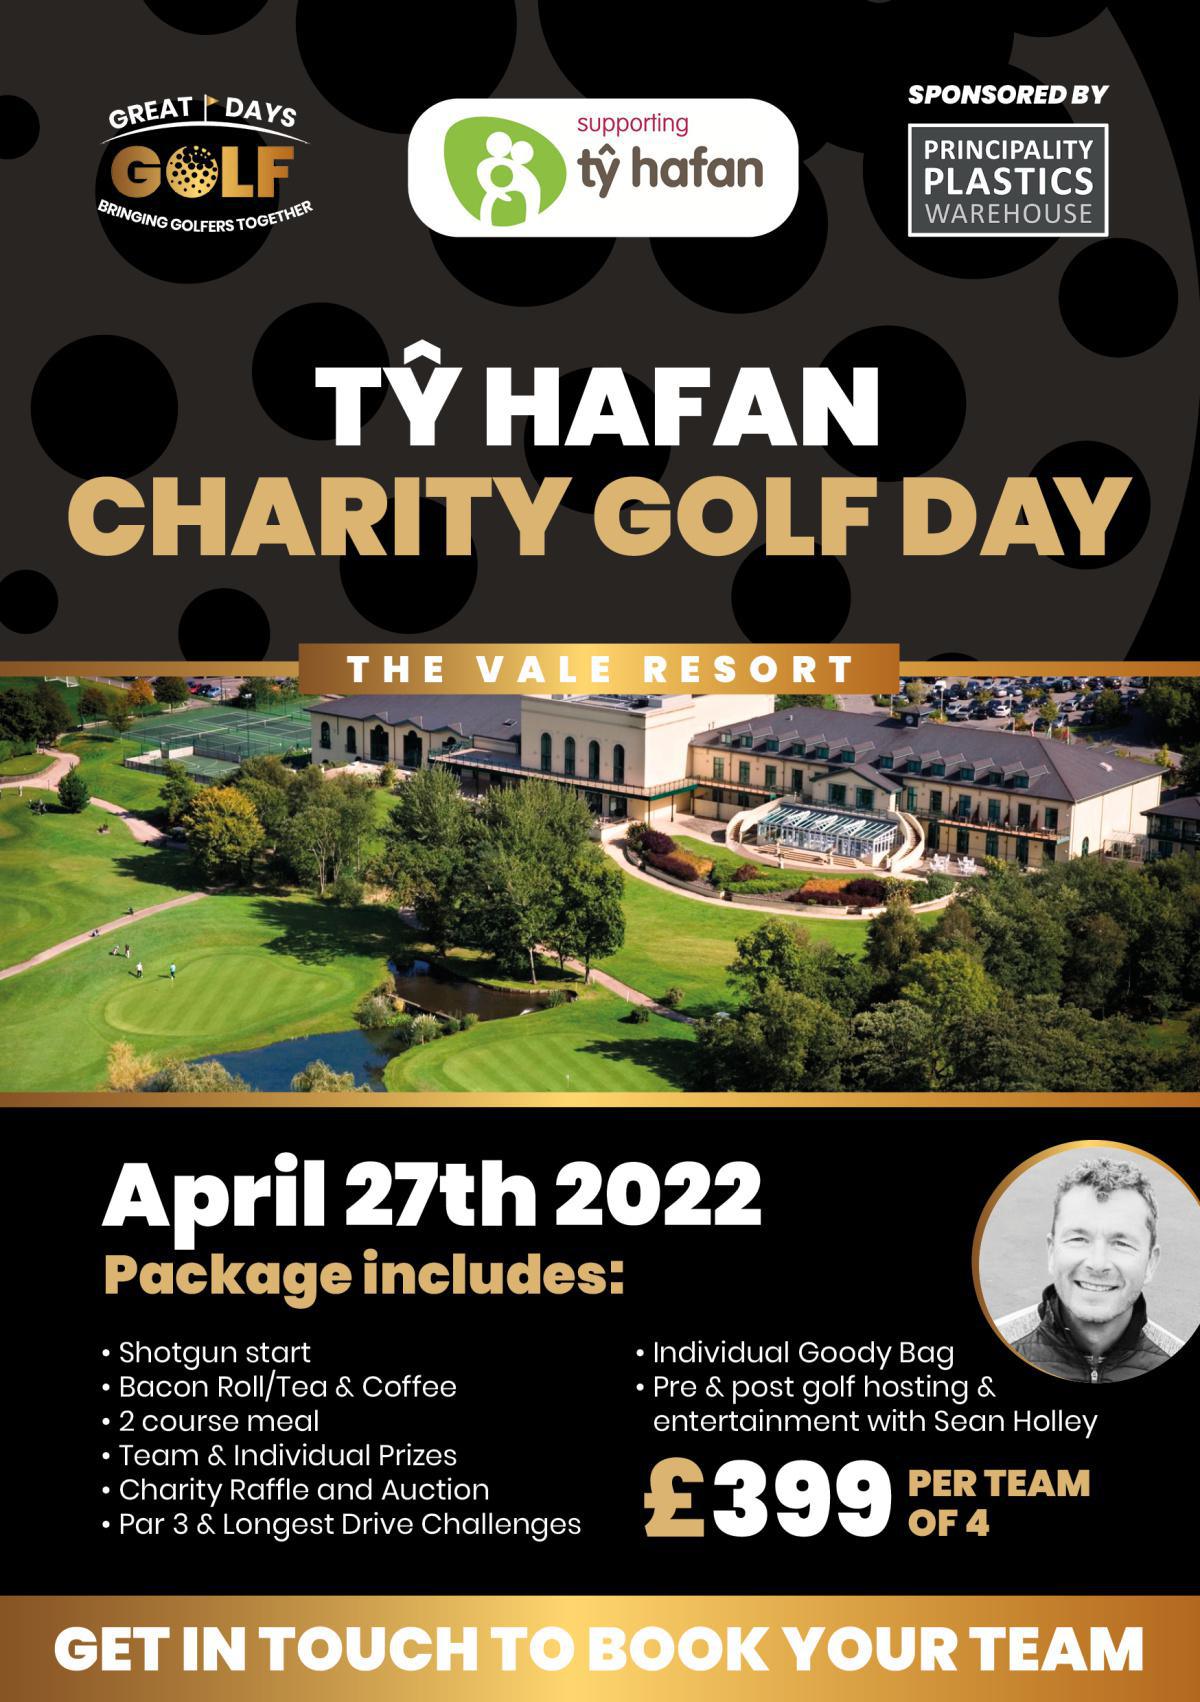 Great Days Golf and Ty Hafan Combine to Provide Entertaining Charity Golf Day